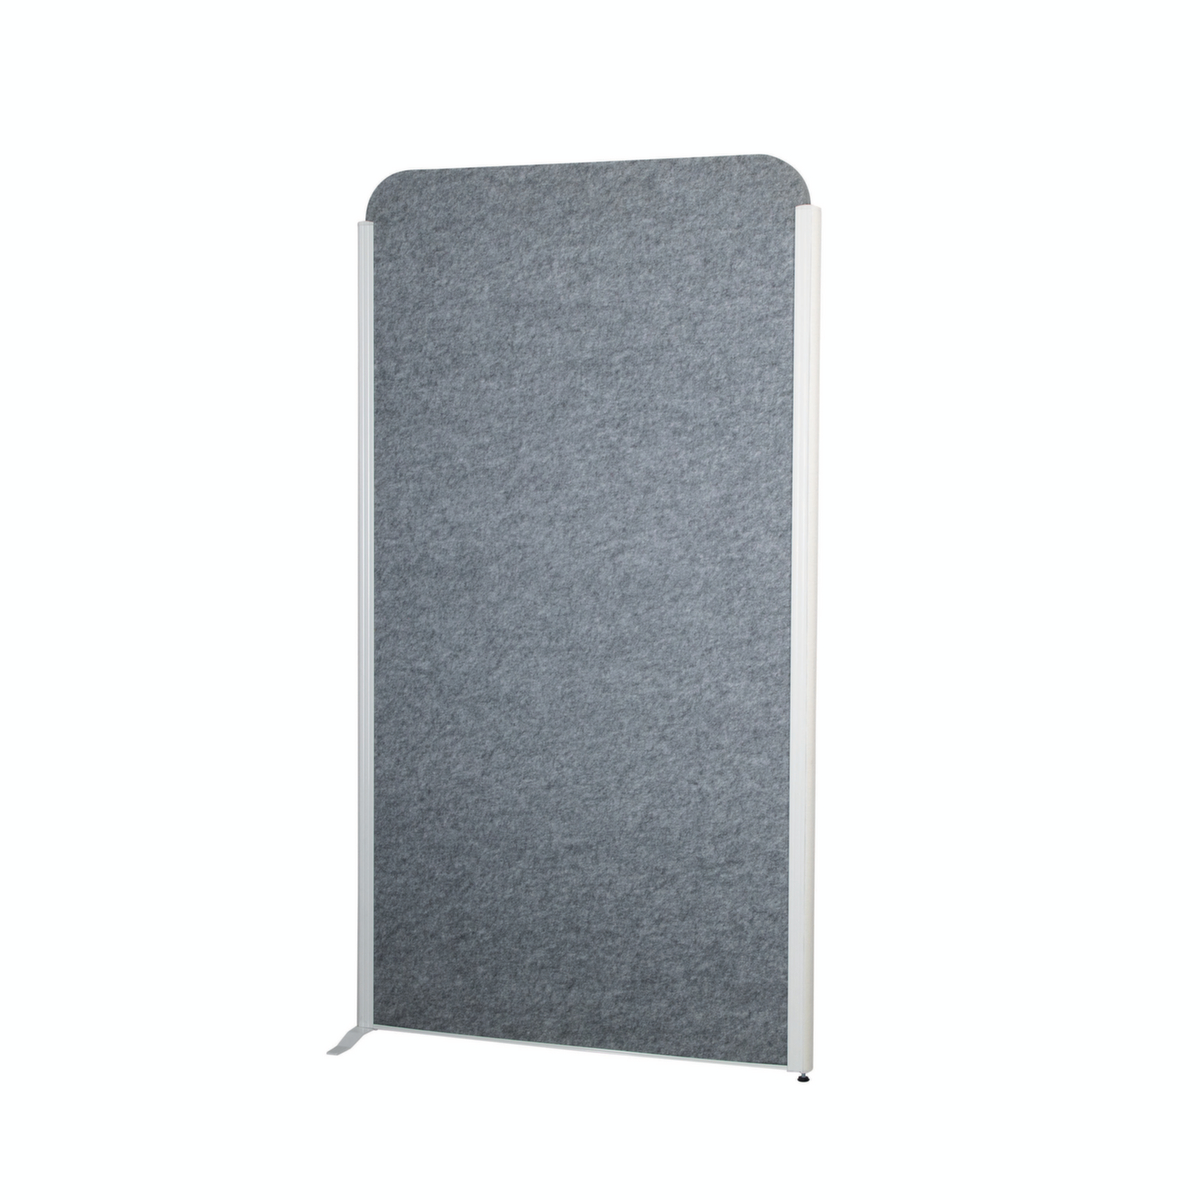 MAUL Scheidingswand-bord MAULcocoon, hoogte x breedte 1820 x 1000 mm, wand donkergrijs  ZOOM